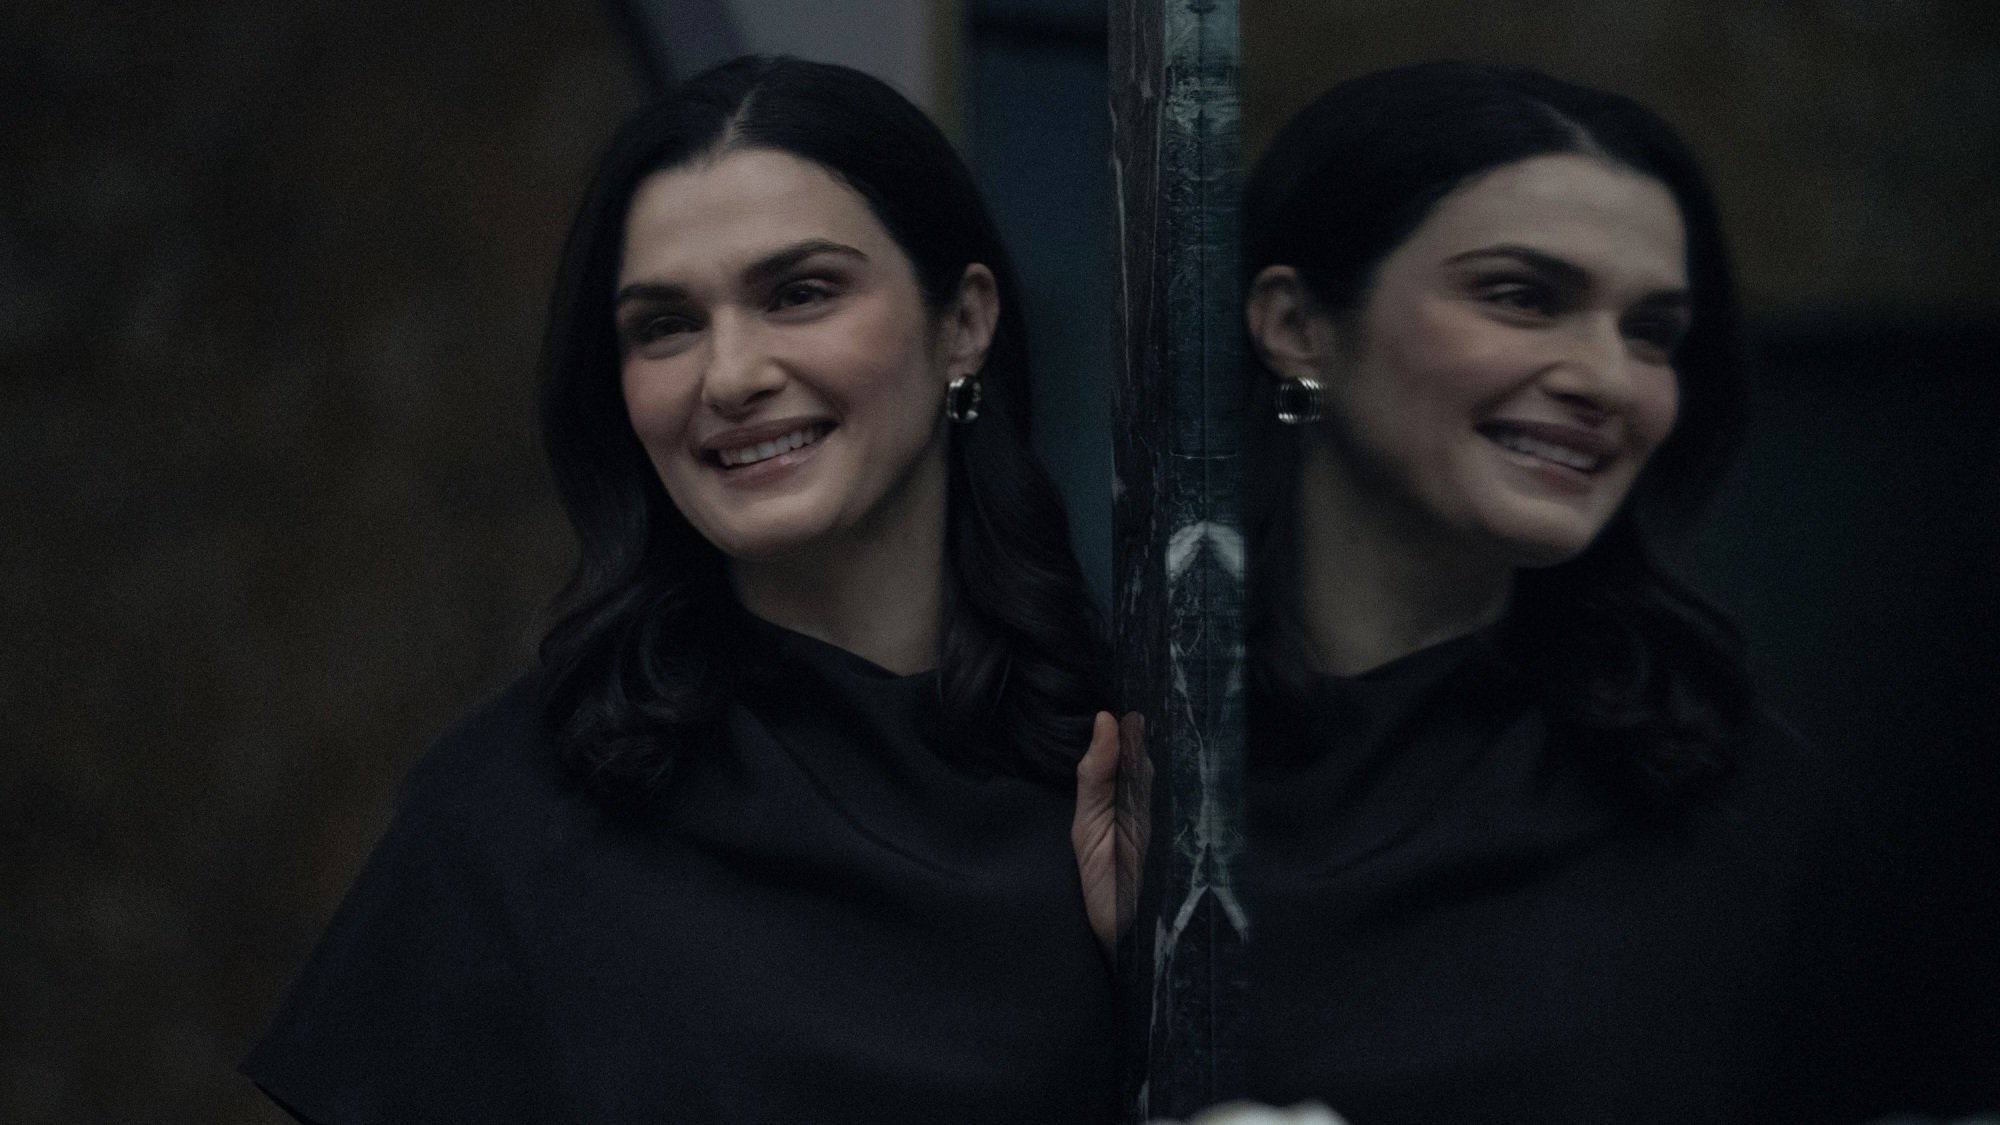 A smiling woman in a dark coat leans against a mirrored wall.